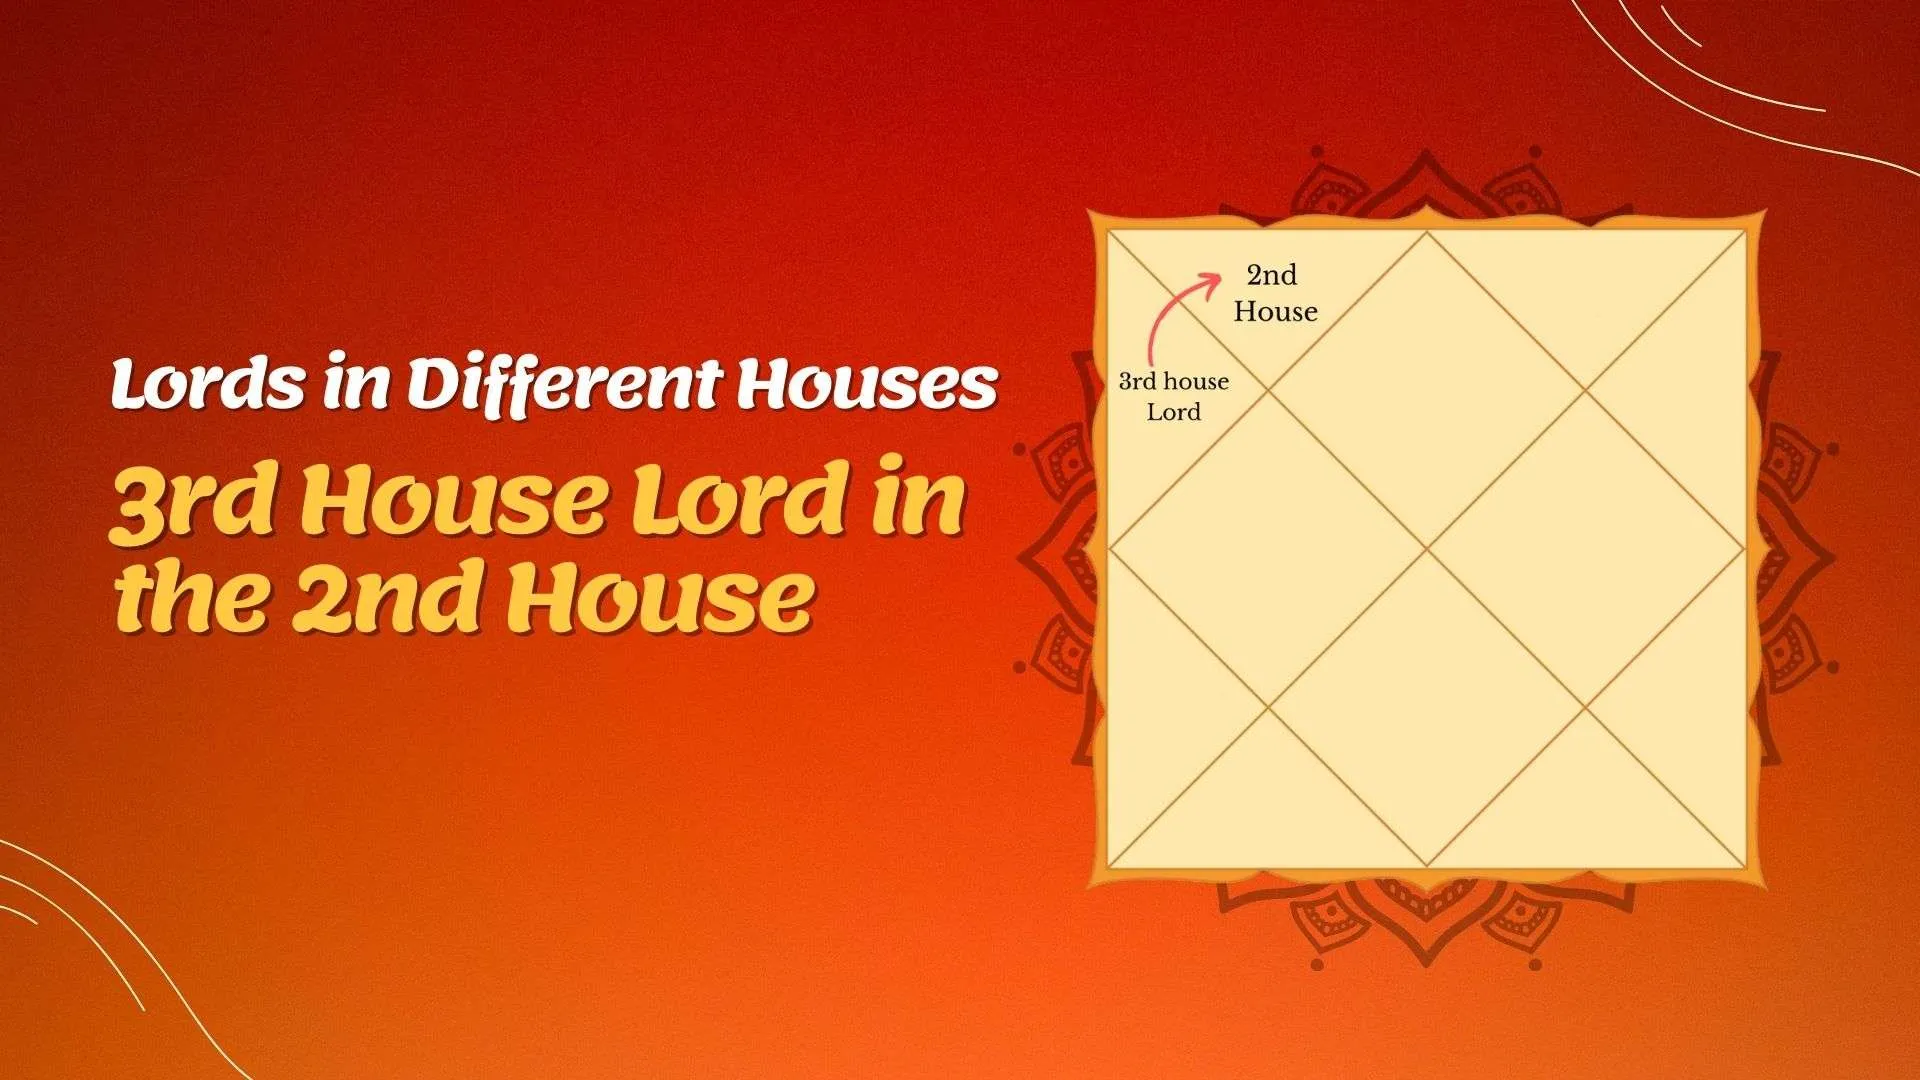 3rd House Lord in the 2nd House